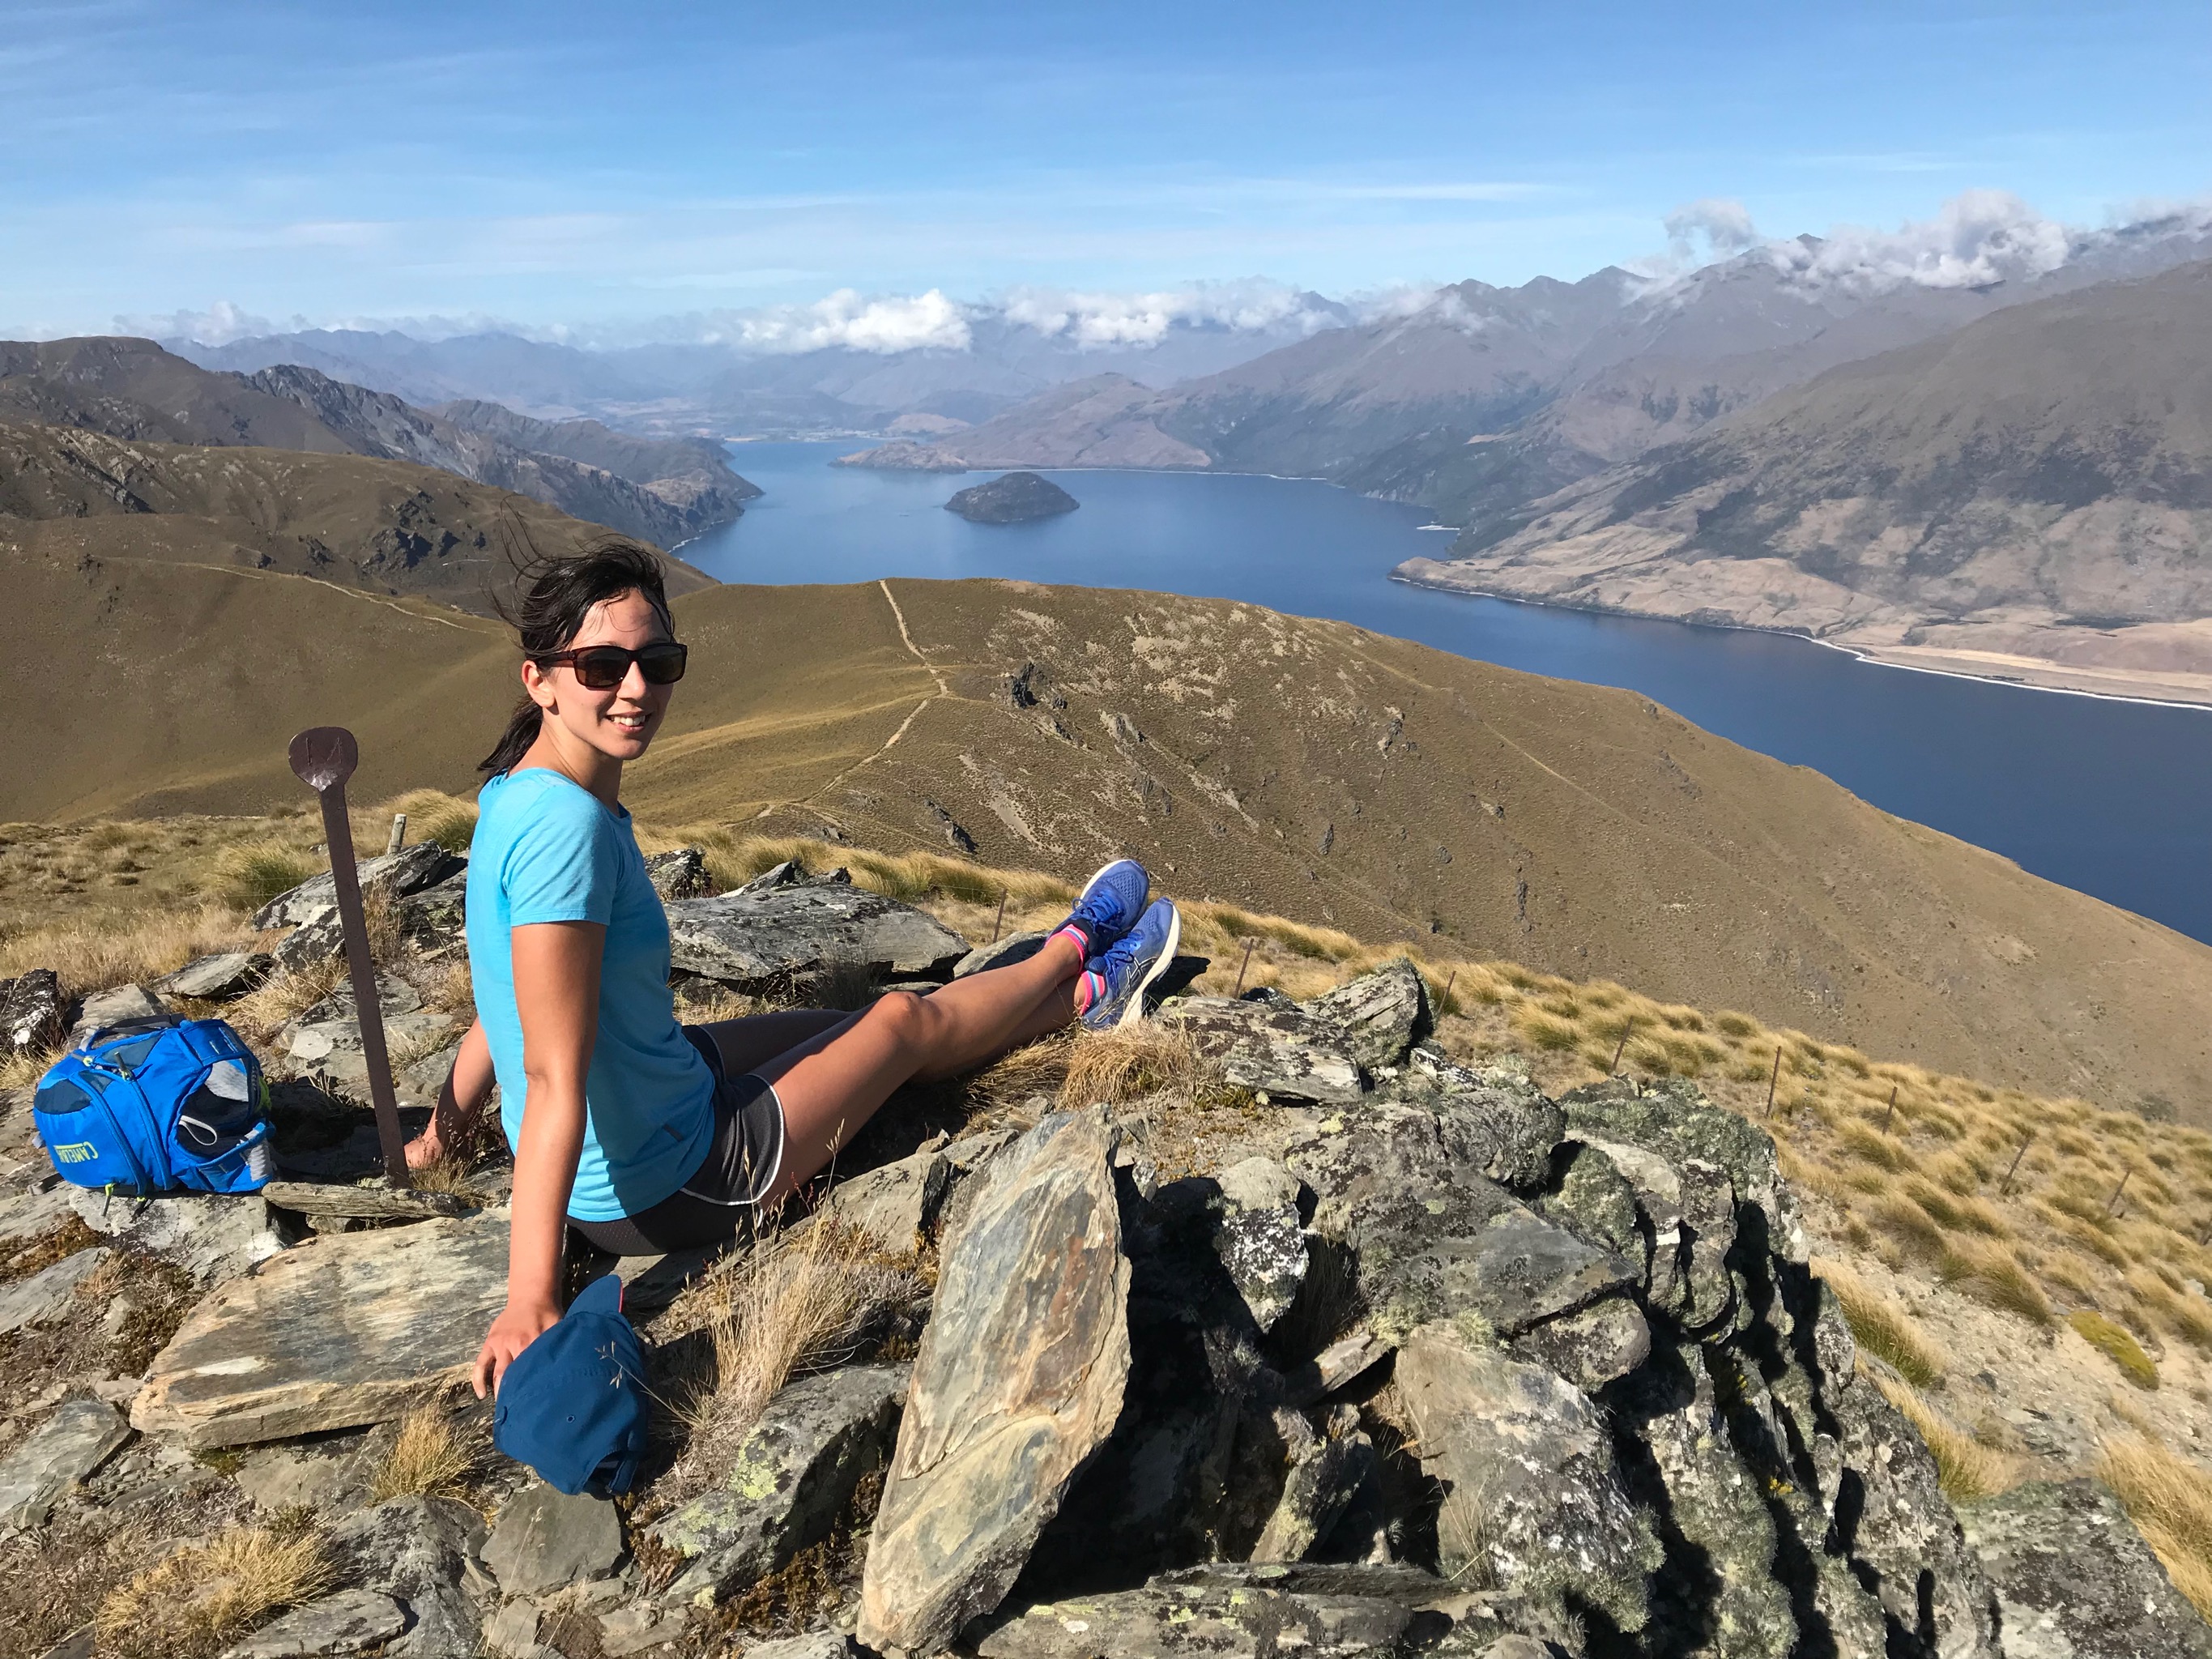 Alex relaxing at the next peak south along the ridgeline from Isthmus Peak, with Lake Wanaka in the background.